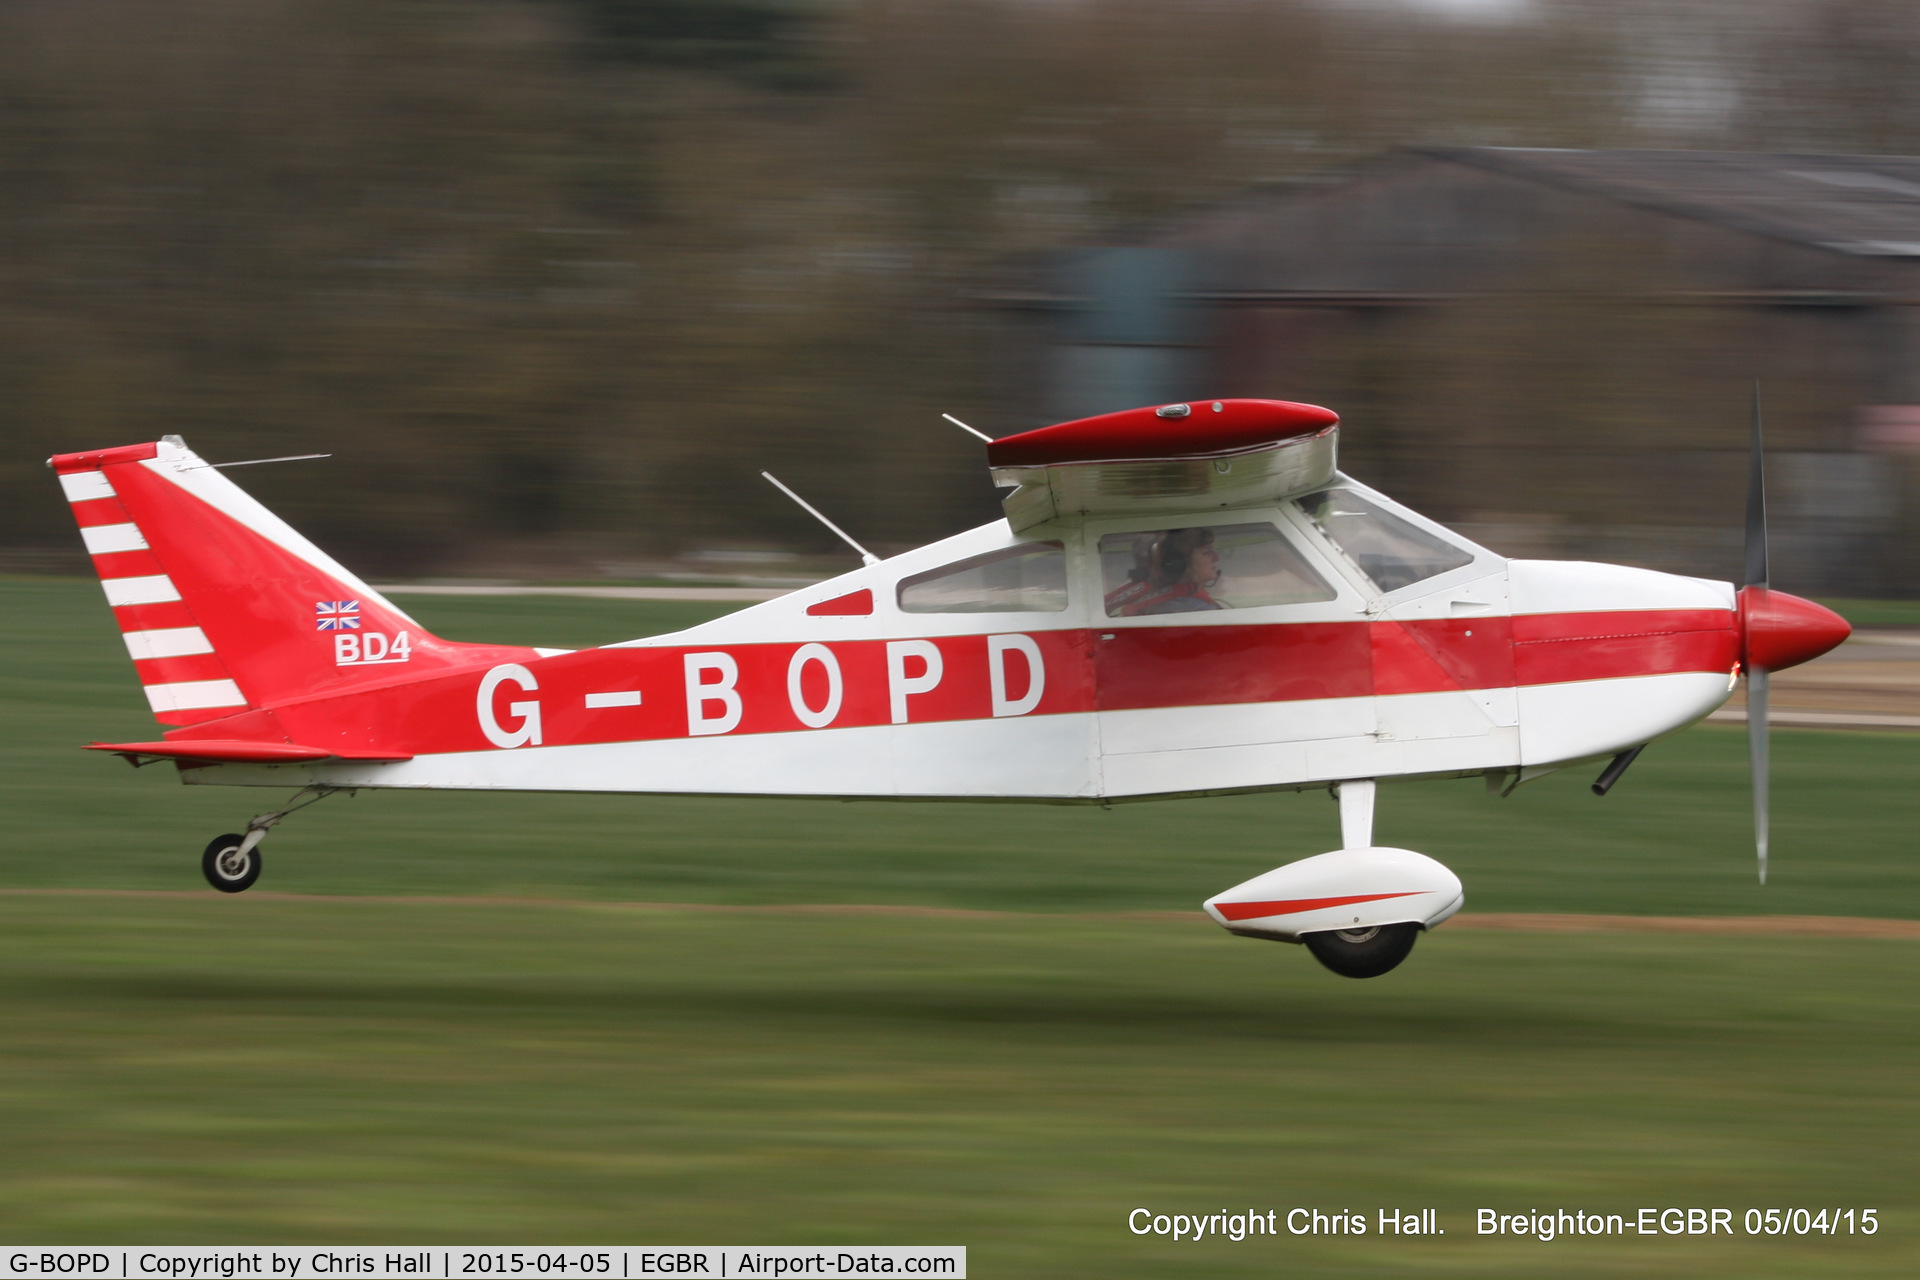 G-BOPD, 1974 Bede BD-4 C/N 632, at the Easter Homebuilt Aircraft Fly-in